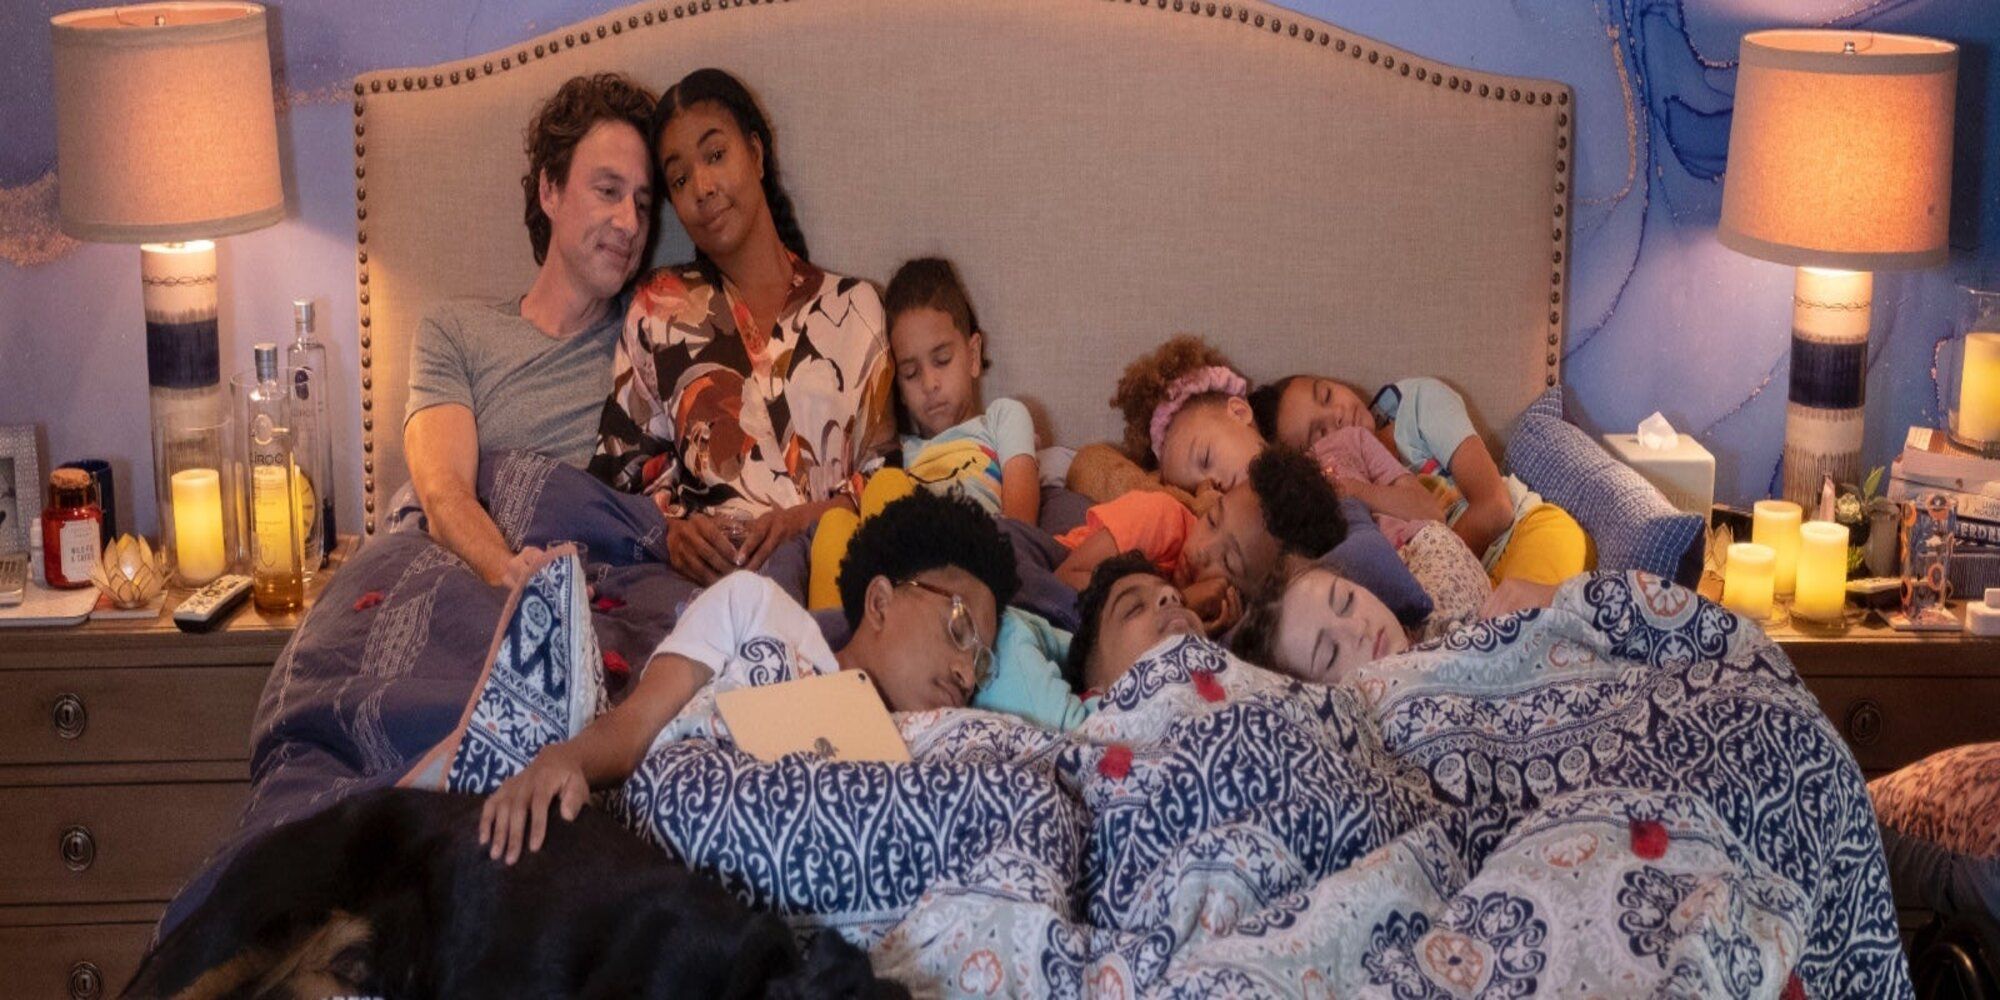 The Baker Family in the 2022 Reboot All Together Sat In Bed